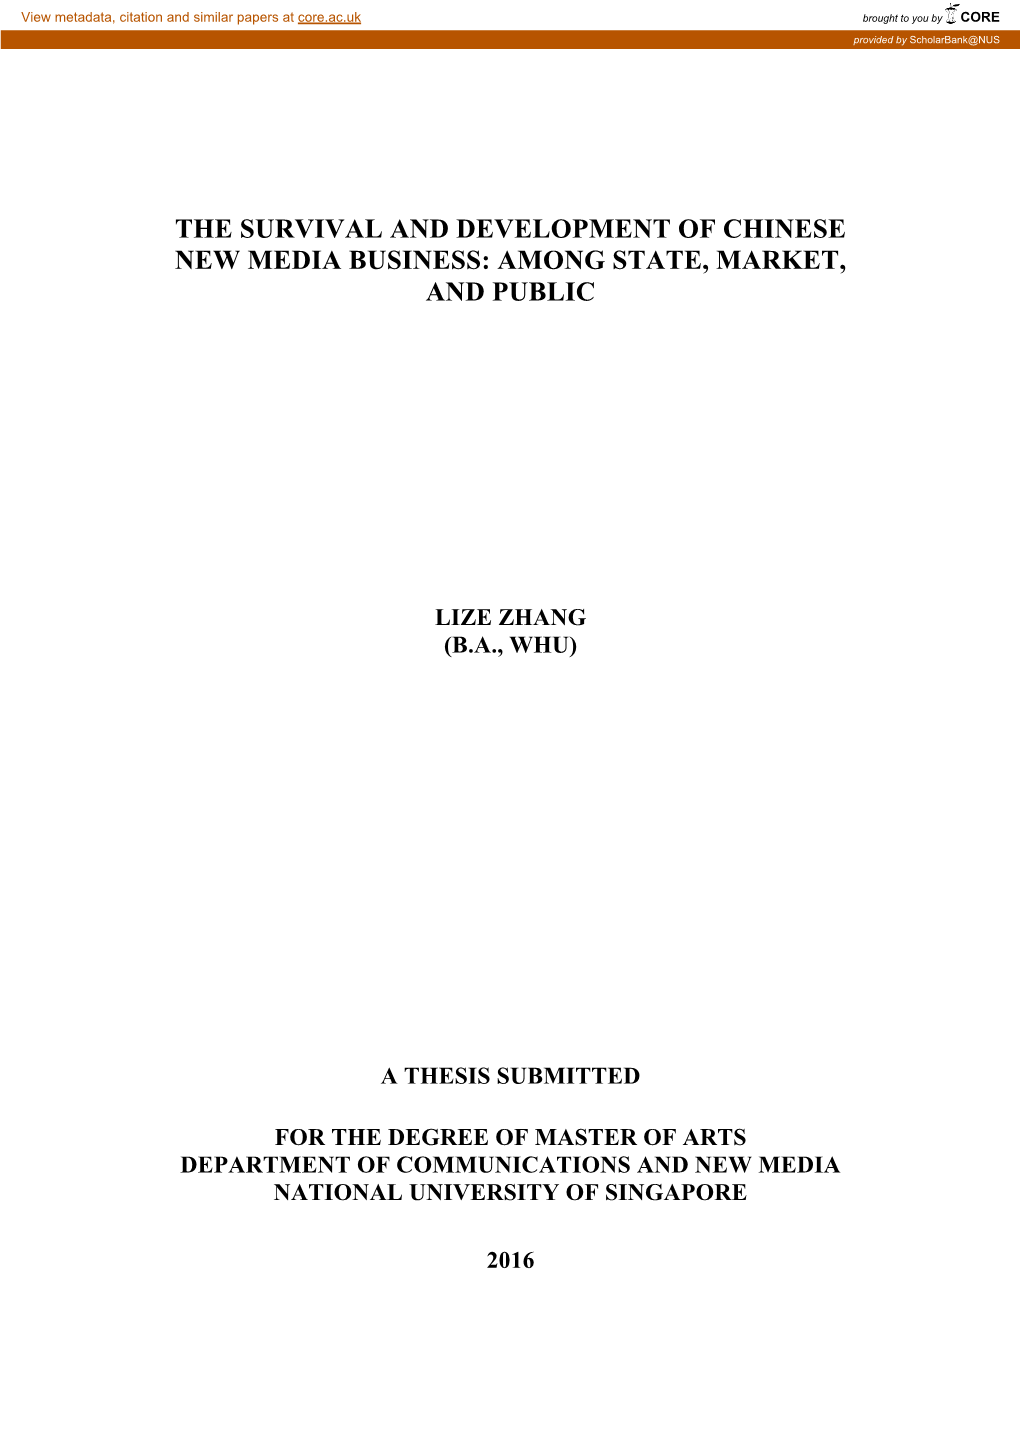 The Survival and Development of Chinese New Media Business: Among State, Market, and Public